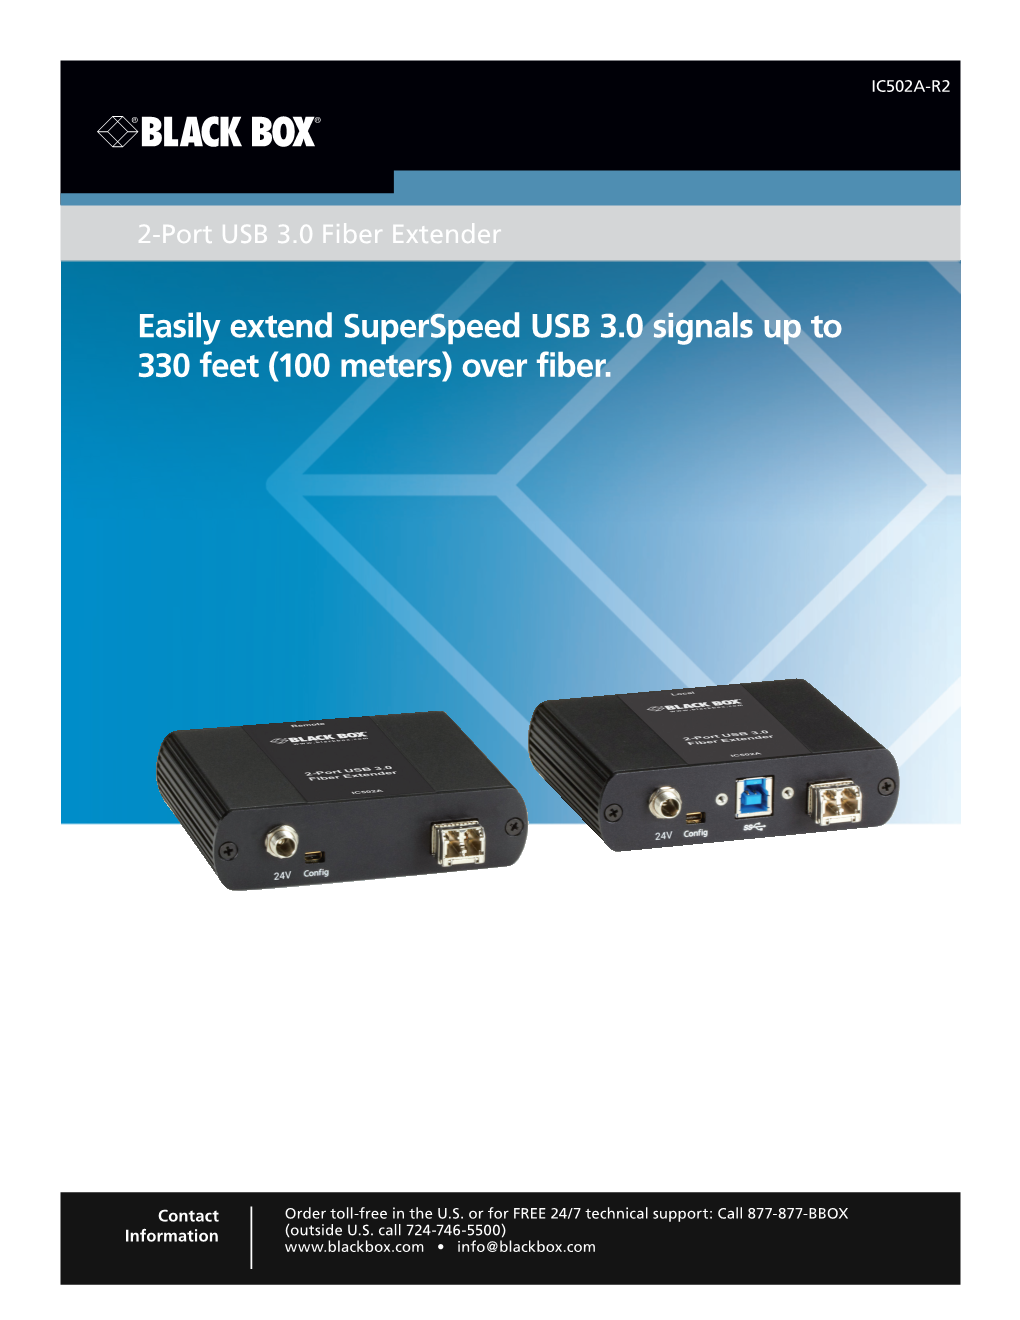 Easily Extend Superspeed USB 3.0 Signals up to 330 Feet (100 Meters) Over Fiber